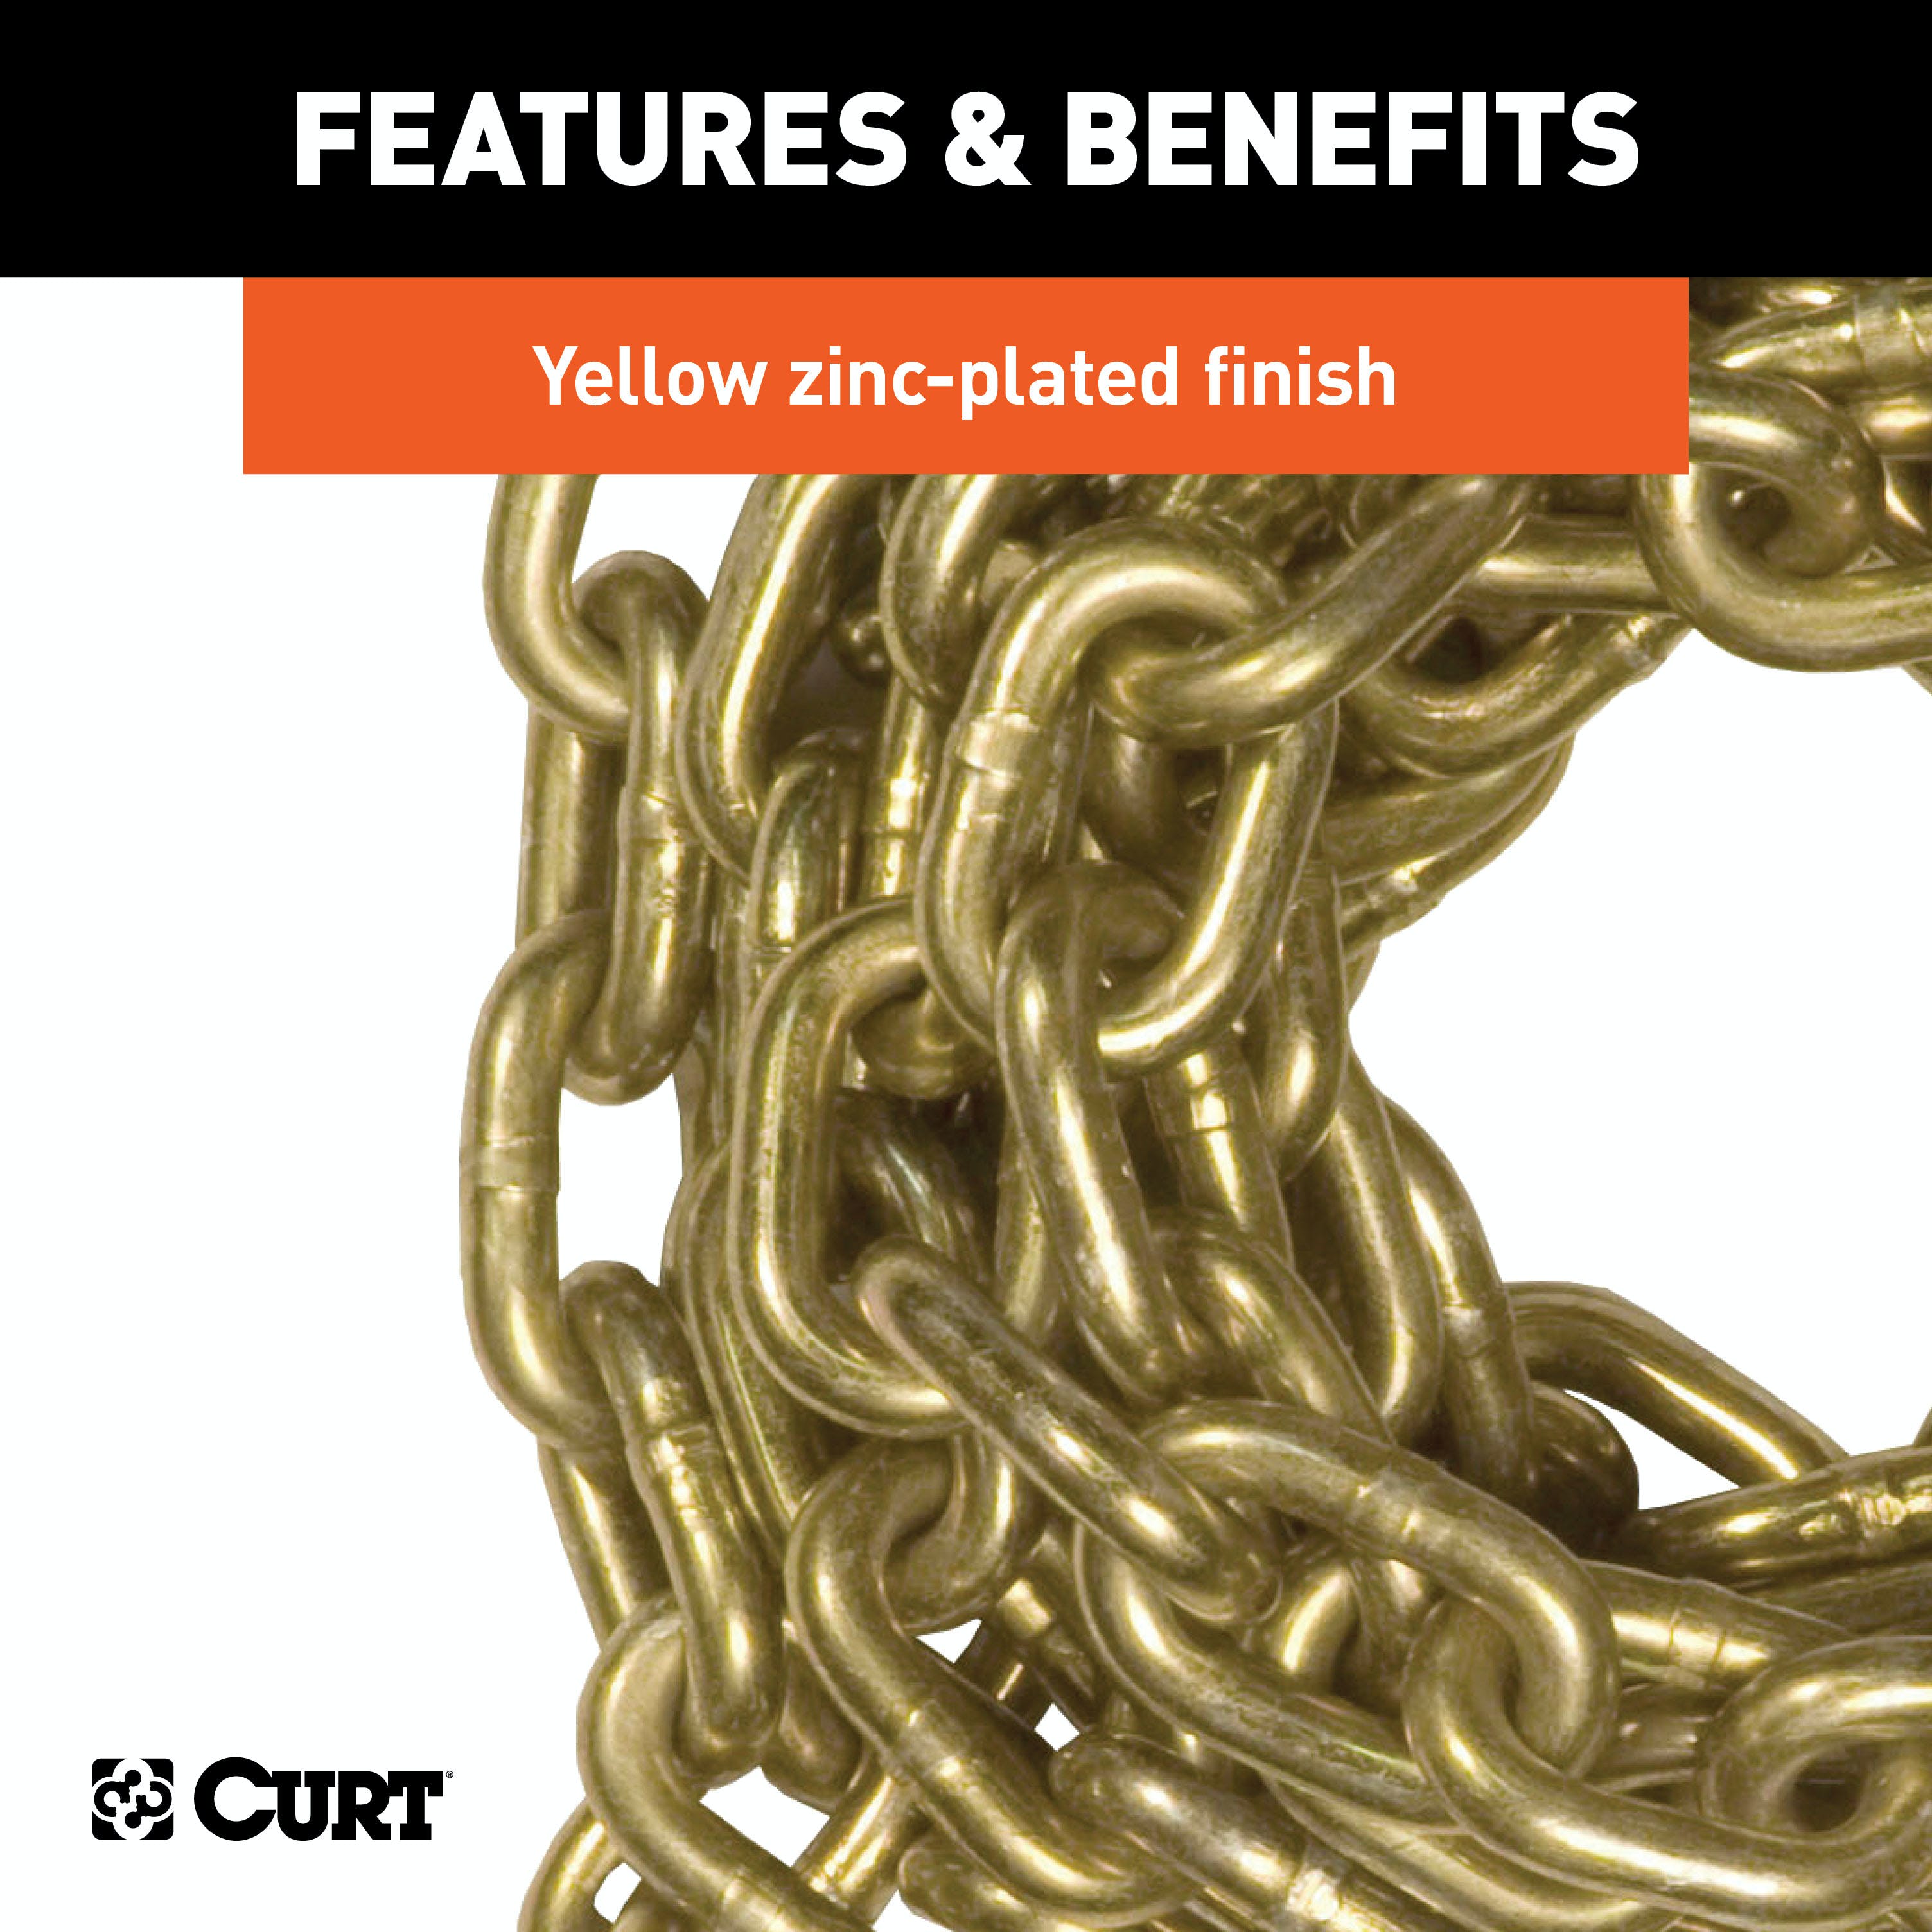 CURT 80309 14' Transport Binder Safety Chain with 2 Clevis Hooks (26,400 lbs, Yellow Zinc)